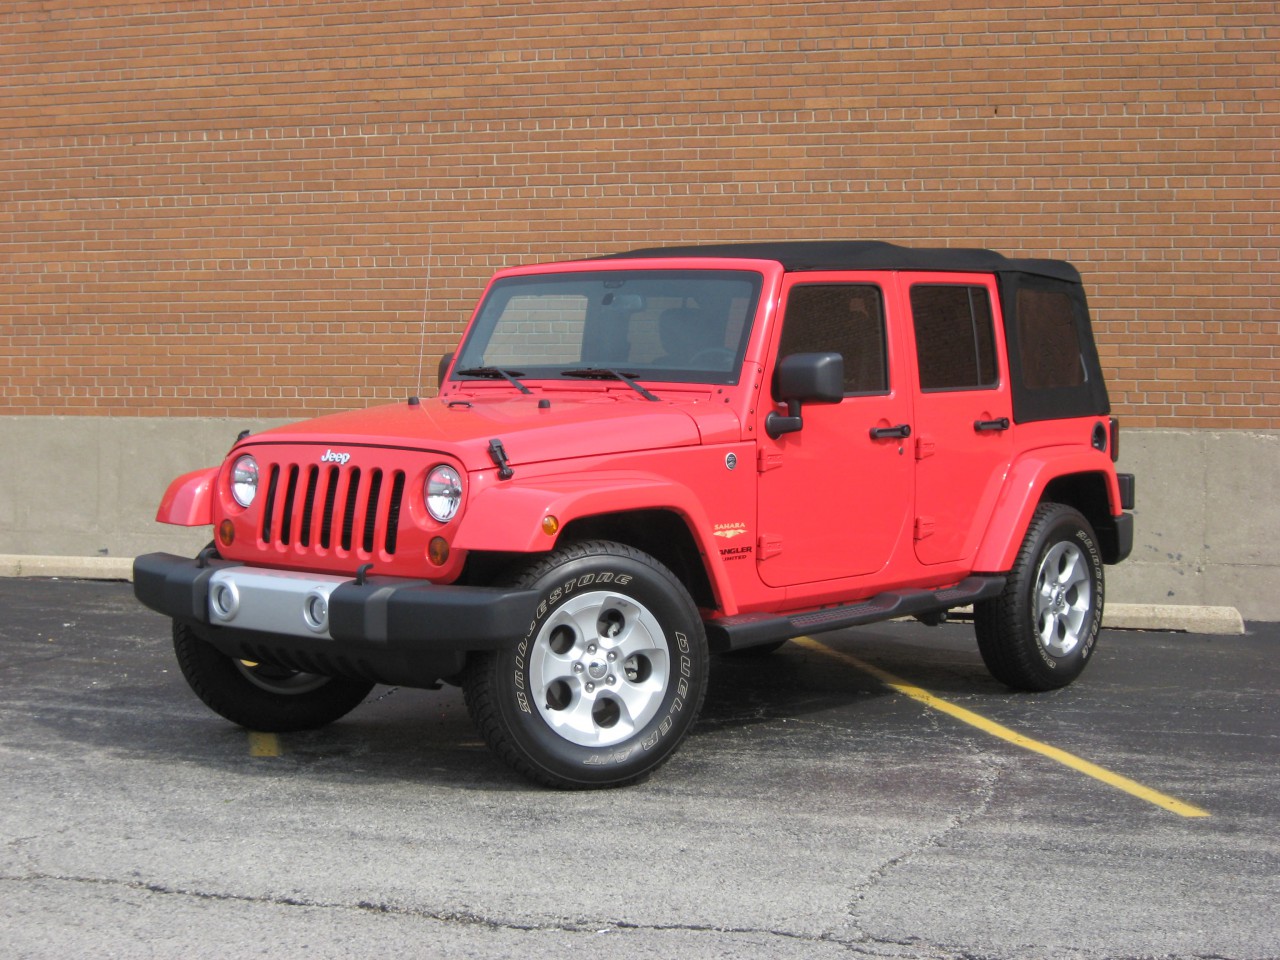 Test Drive: 2013 Jeep Wrangler Unlimited "Sahara" - The Daily Drive |  Consumer Guide® The Daily Drive | Consumer Guide®